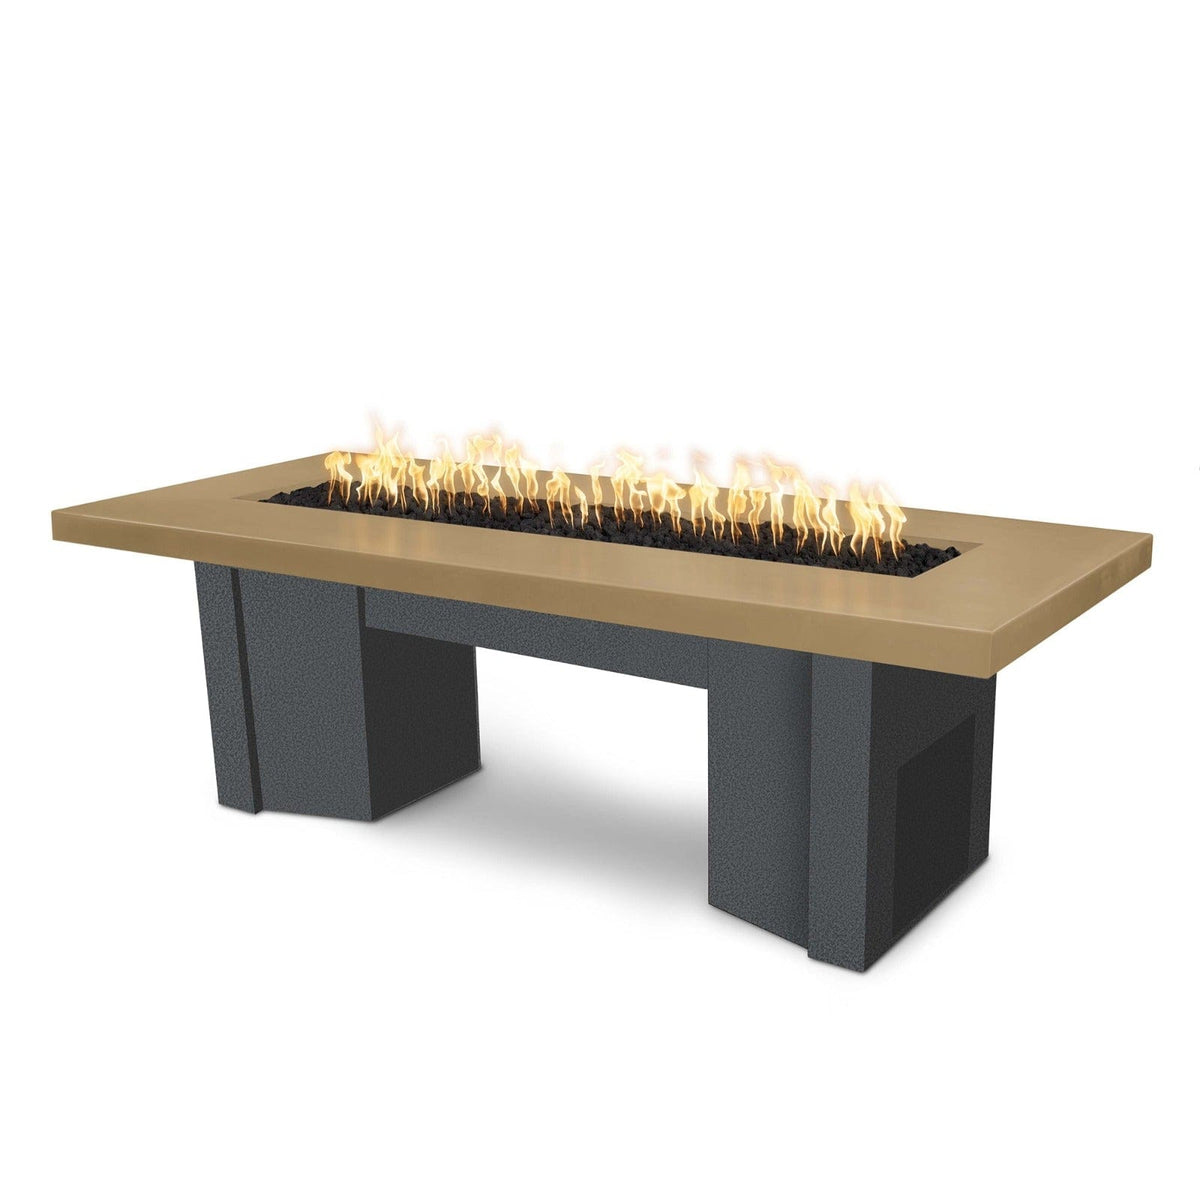 The Outdoor Plus Fire Features Brown (-BRN) / Silver Vein Powder Coated Steel (-SLV) The Outdoor Plus 78&quot; Alameda Fire Table Smooth Concrete in Liquid Propane - 110V Plug &amp; Play Electronic Ignition / OPT-ALMGFRC78EKIT-LP